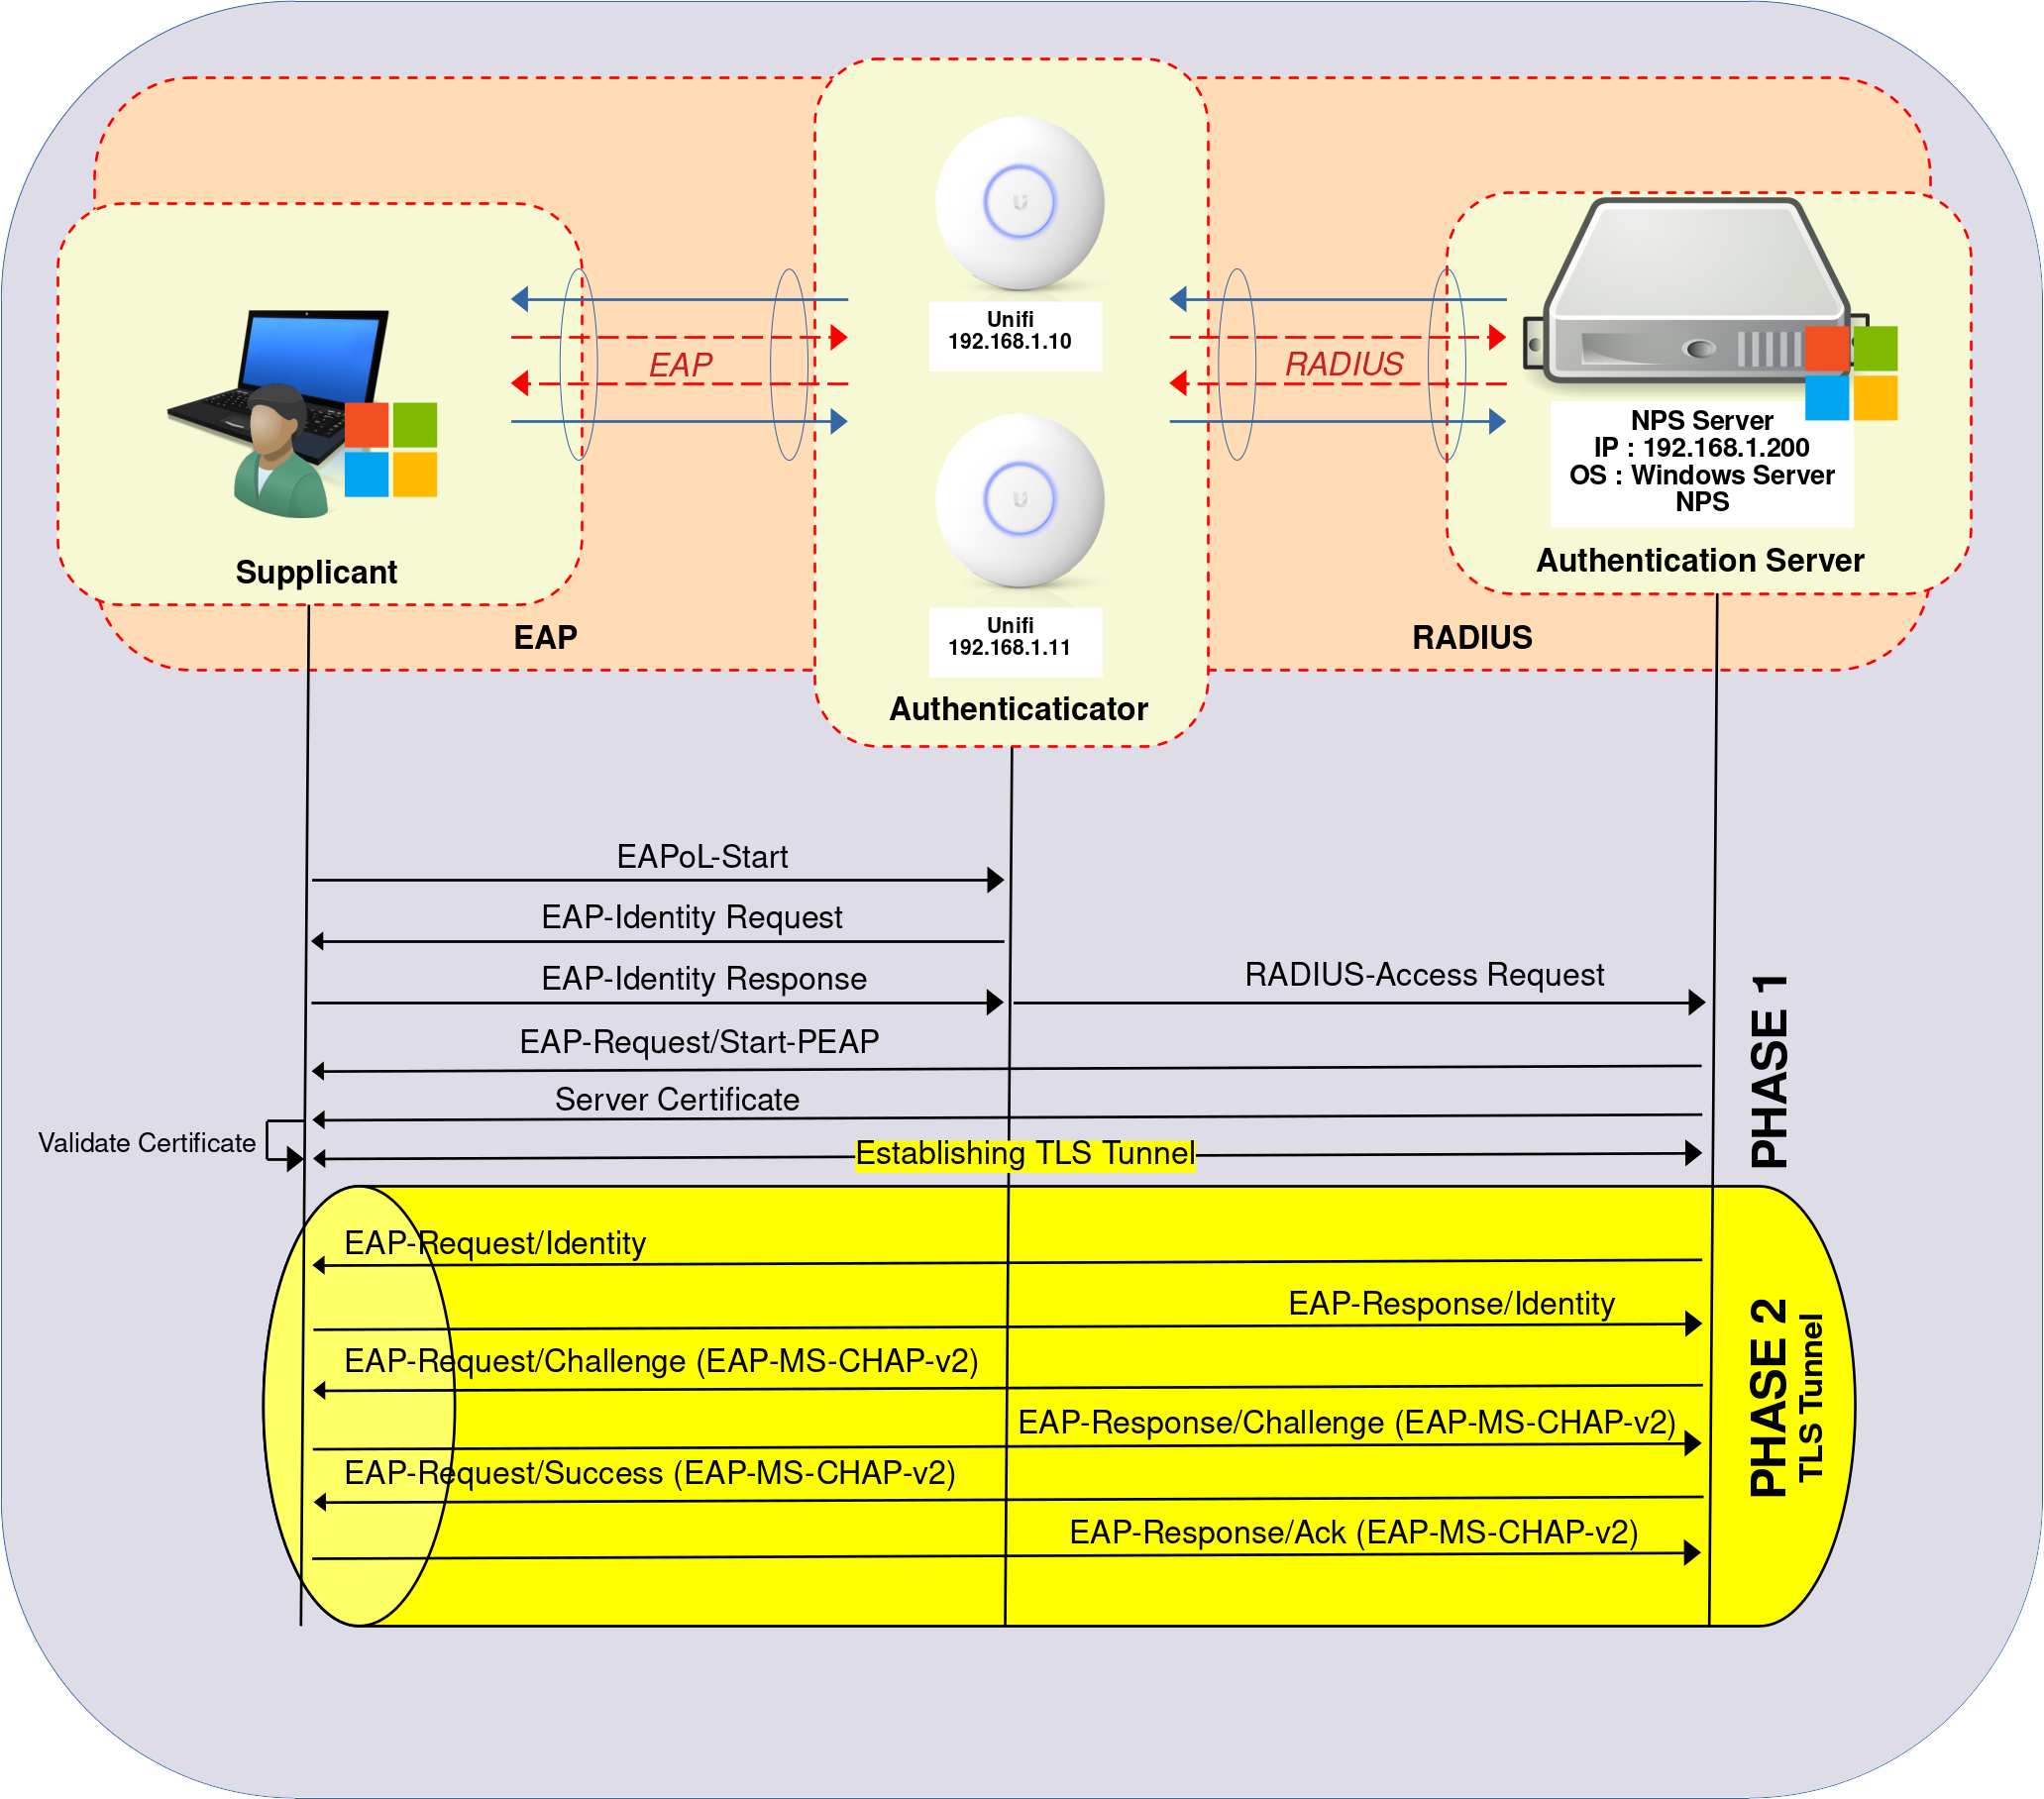 Network diagram showing EAP and RADIUS frames exchanged between a WiFi supplicant, an authenticator and a RADIUS server